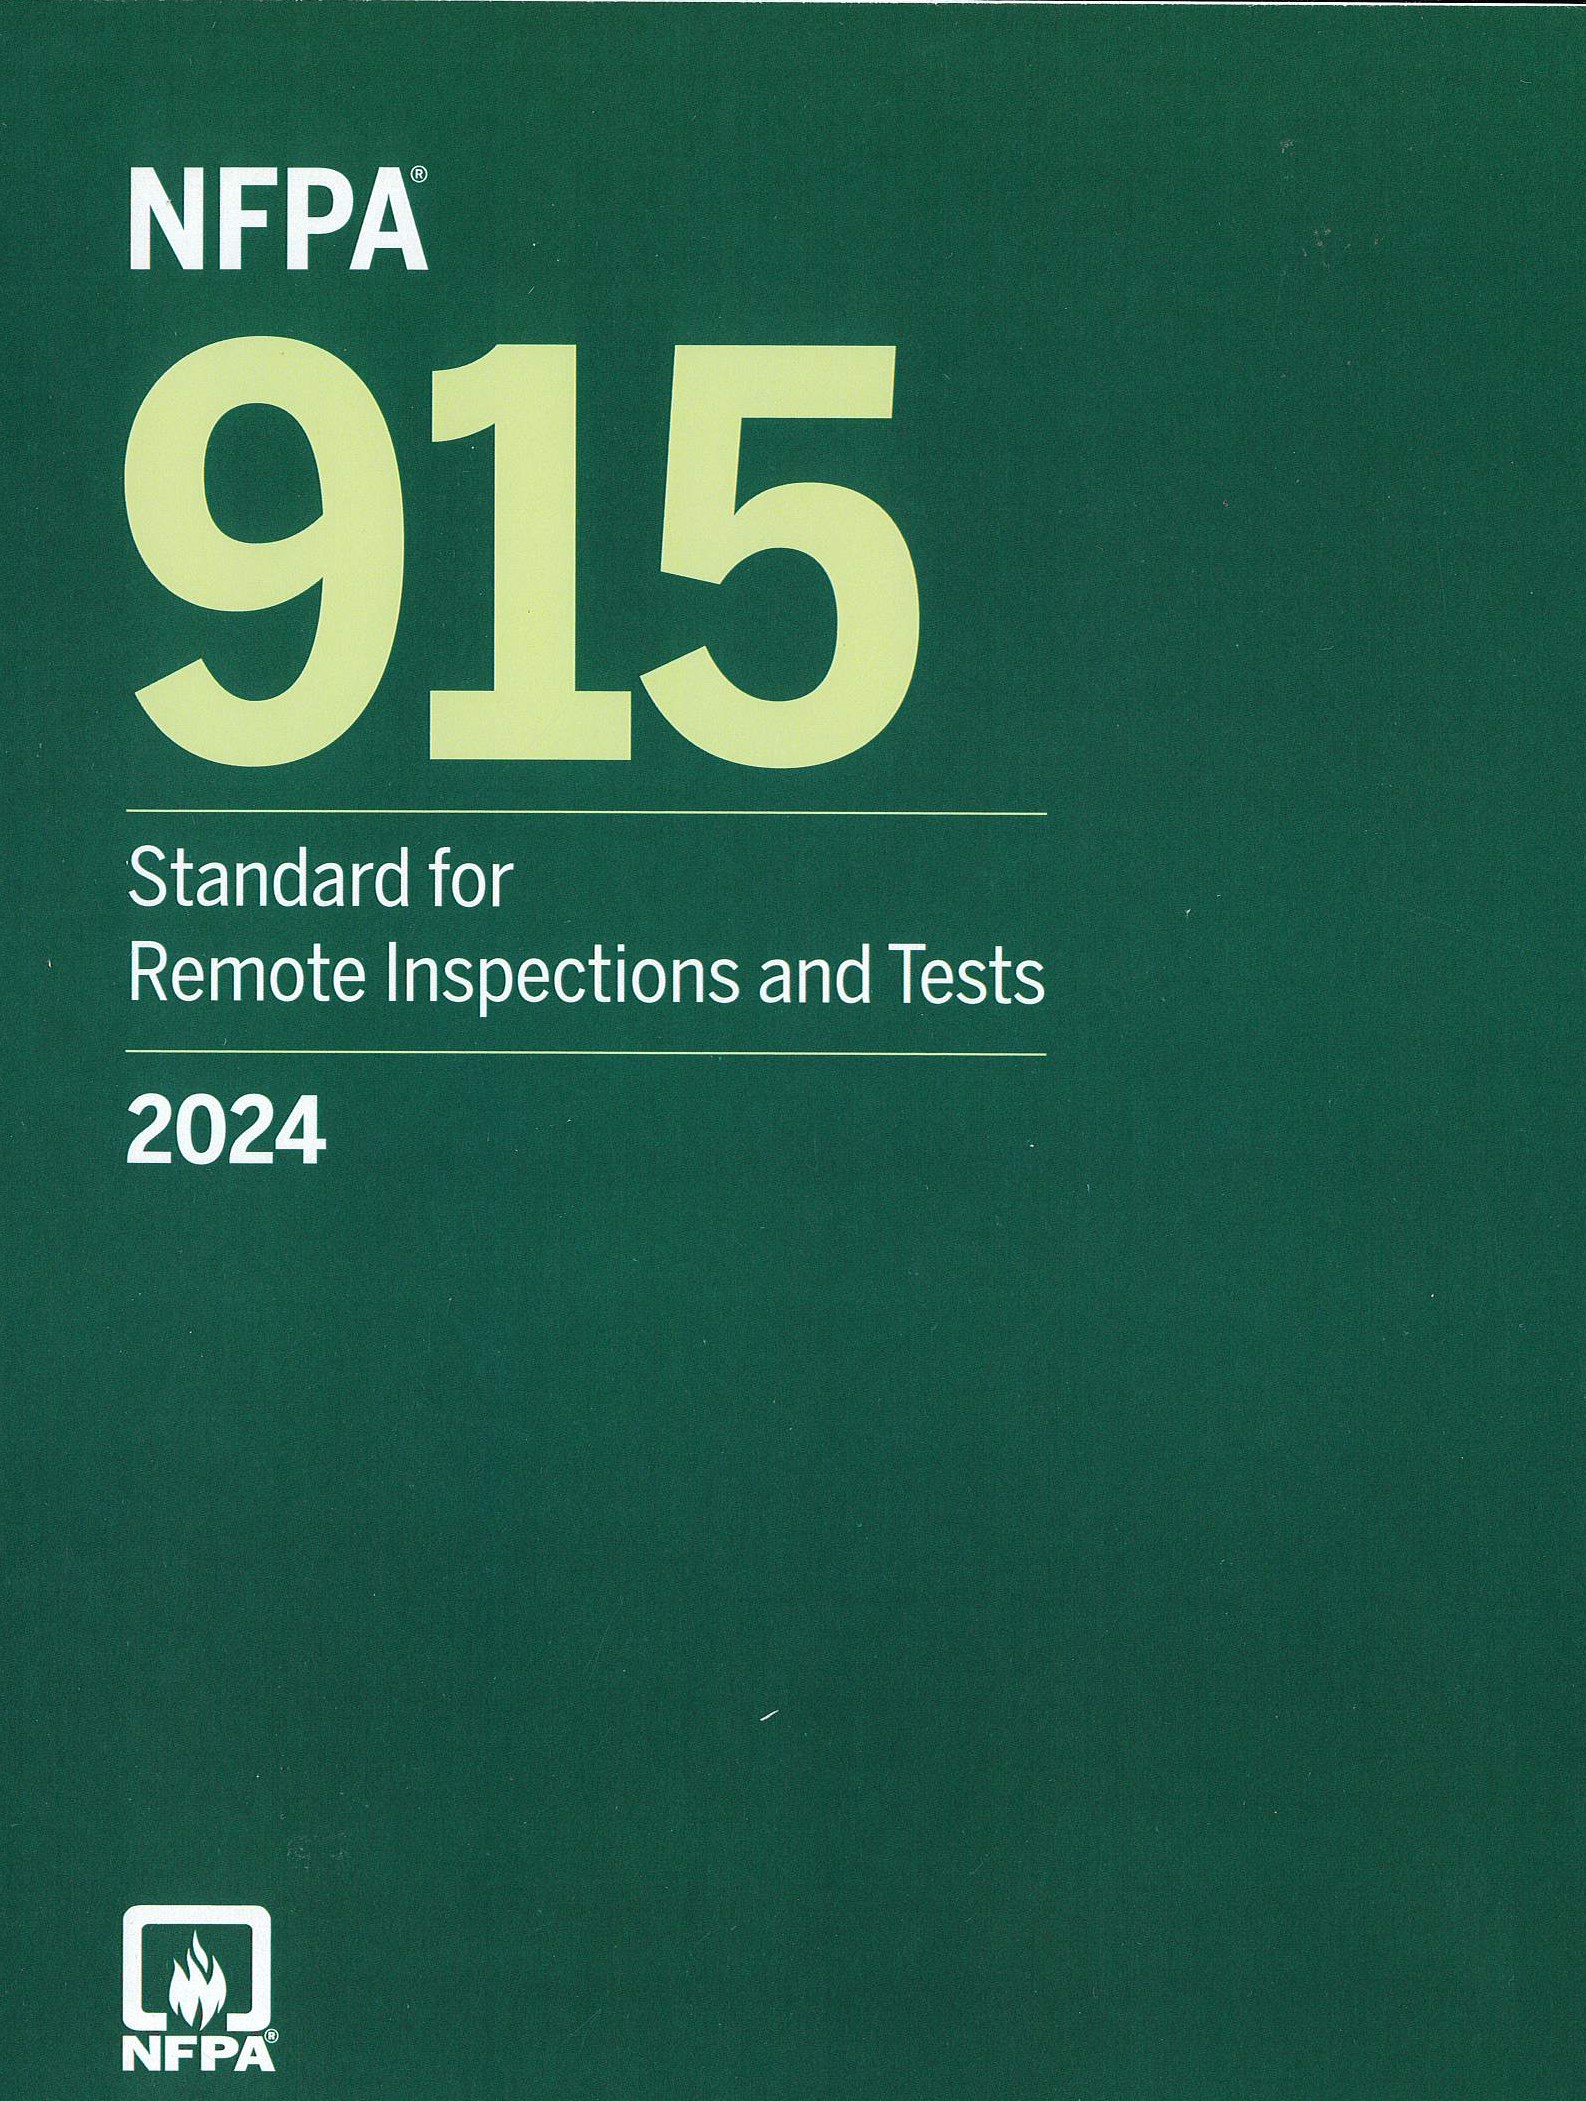 NFPA 915 2024 Remote Inspections and Tests